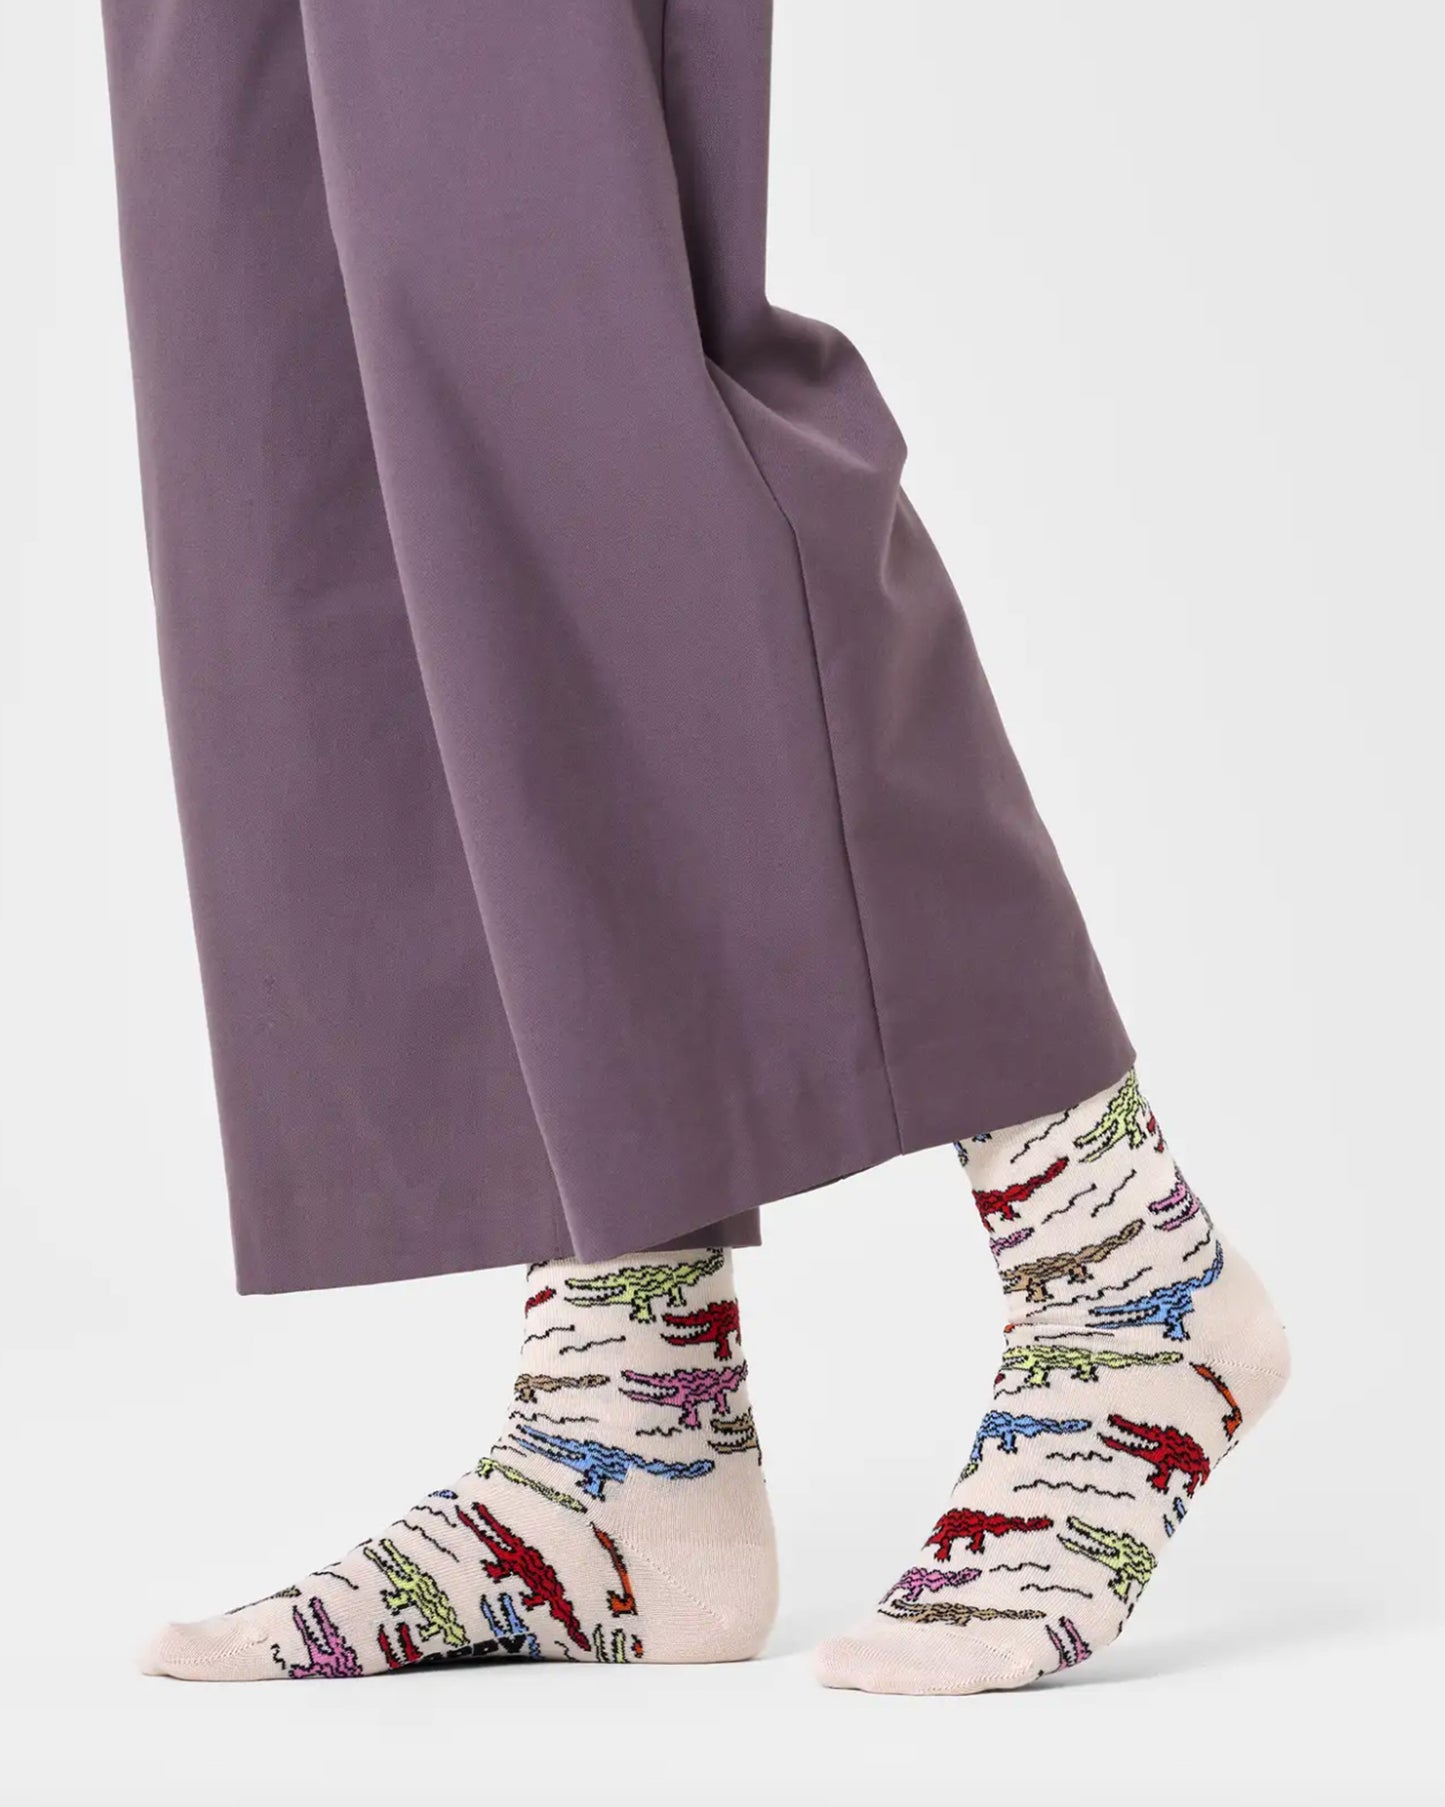 Happy Socks P000713 Crocodile Sock - Cream cotton crew length ankle socks with a multicoloured pattern of crocodiles or alligators. Worn with purple cropped pants.